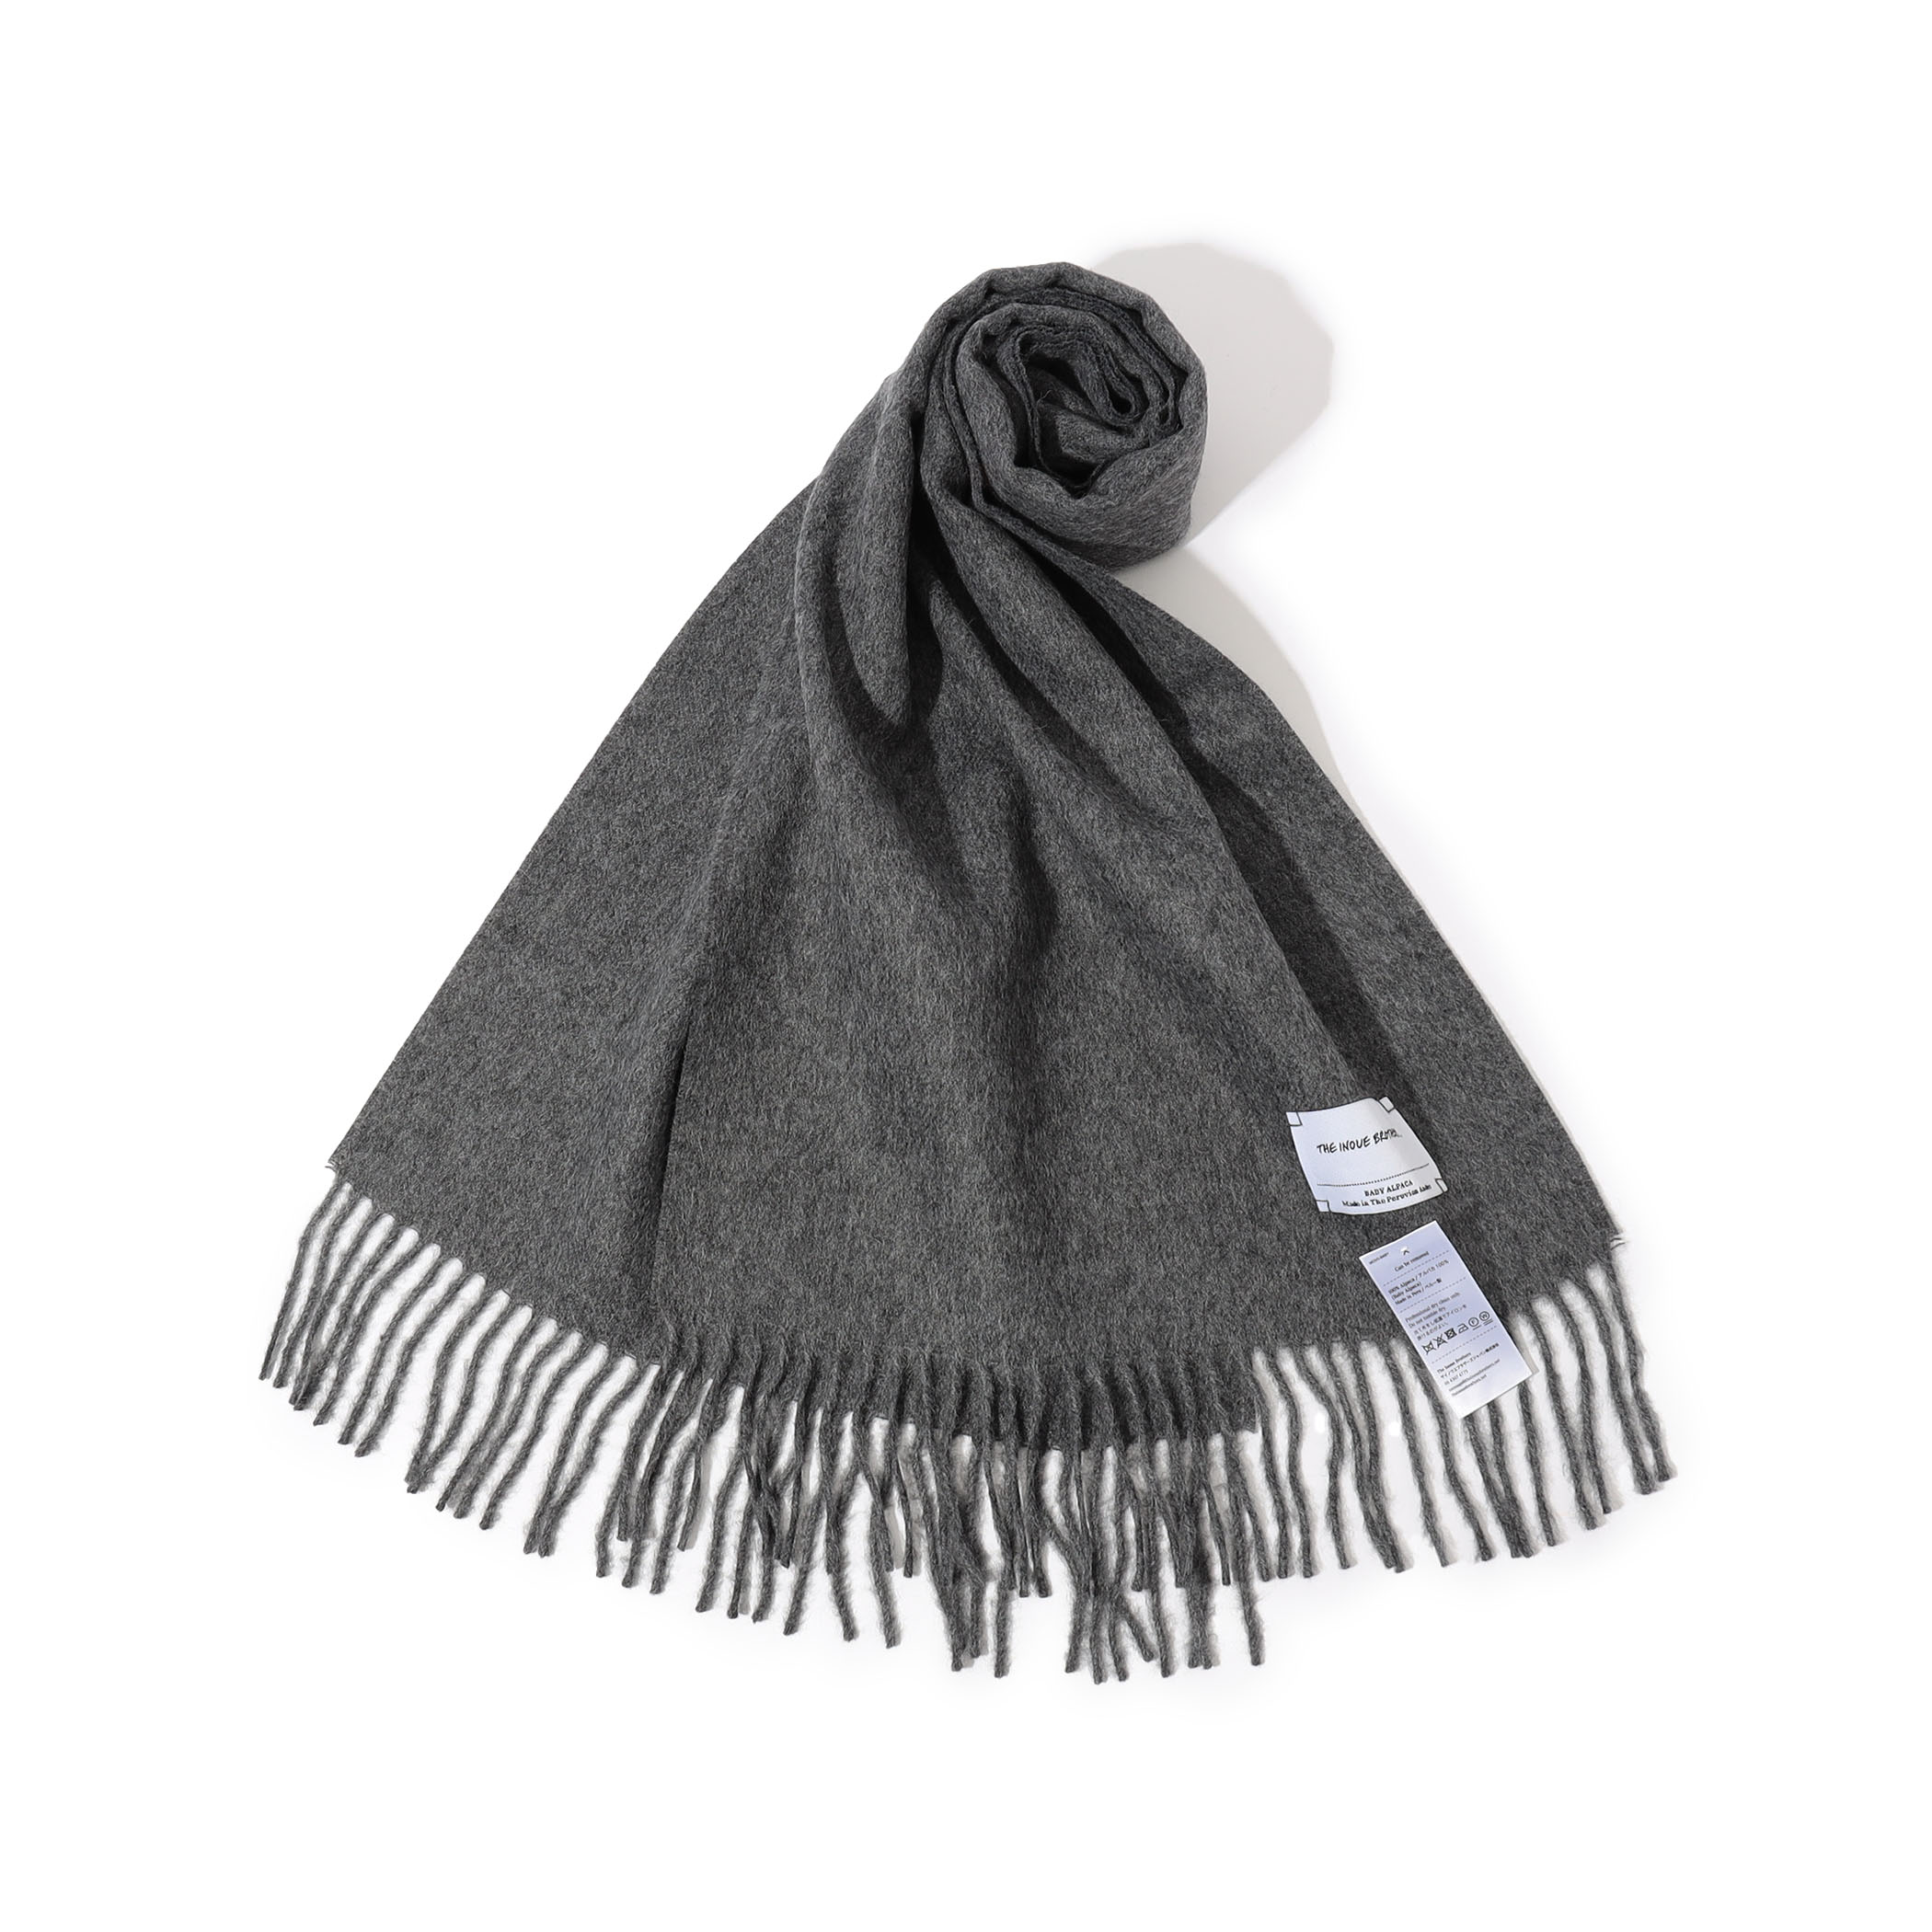 THE INOUE BROTHERS Brushed Scarf アルパカ ストール 